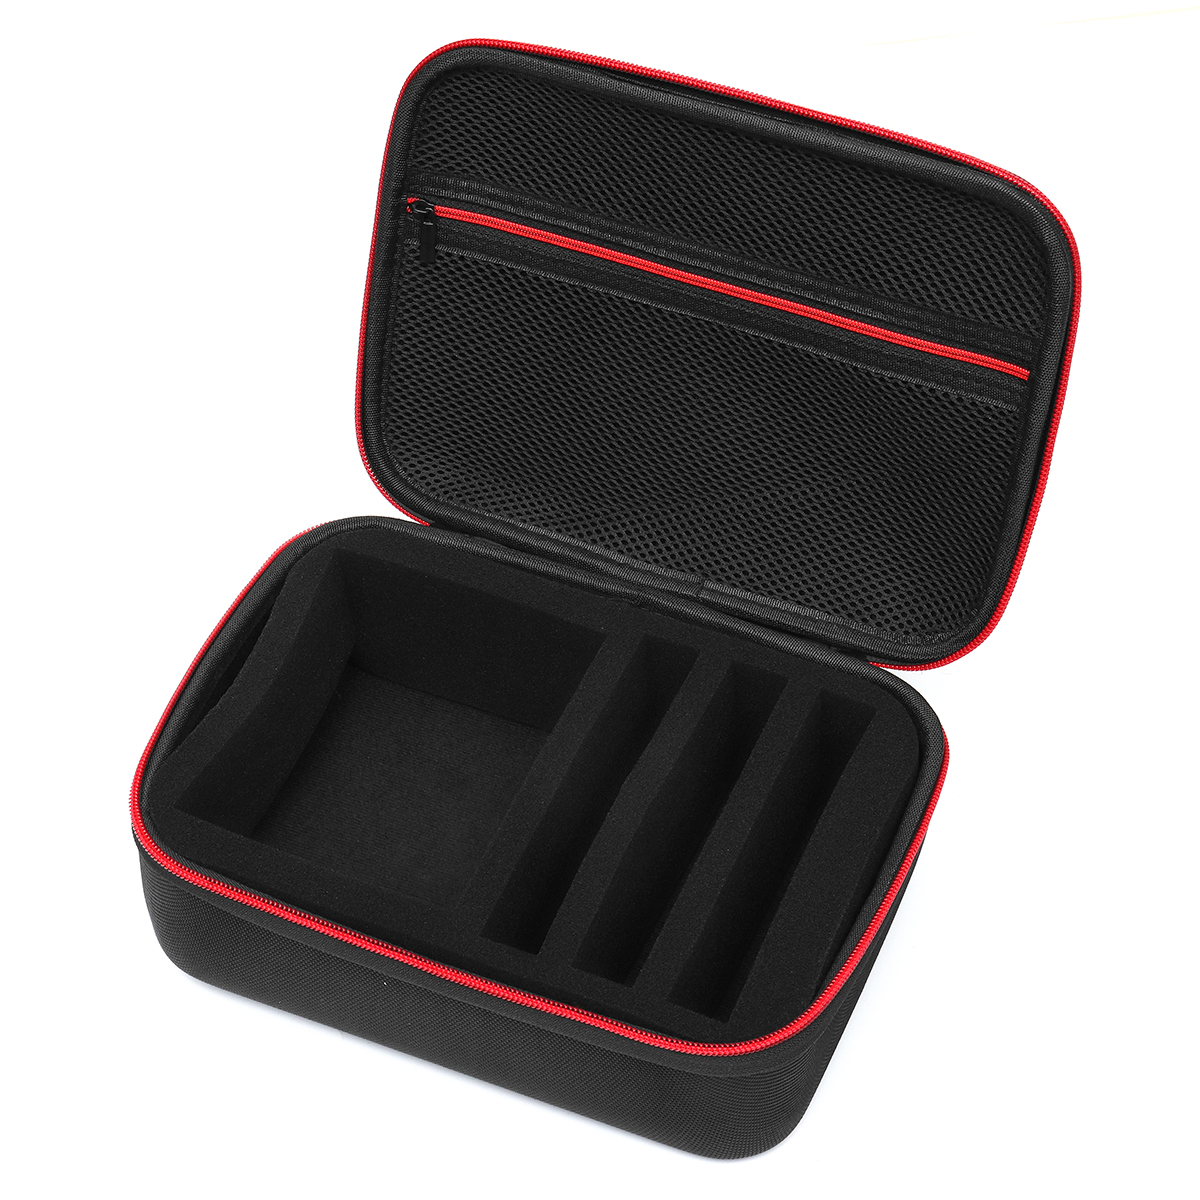 Portable Travel Storage Box Carry Case Bag For Nintendo Switch MINI SFC Game Console 10